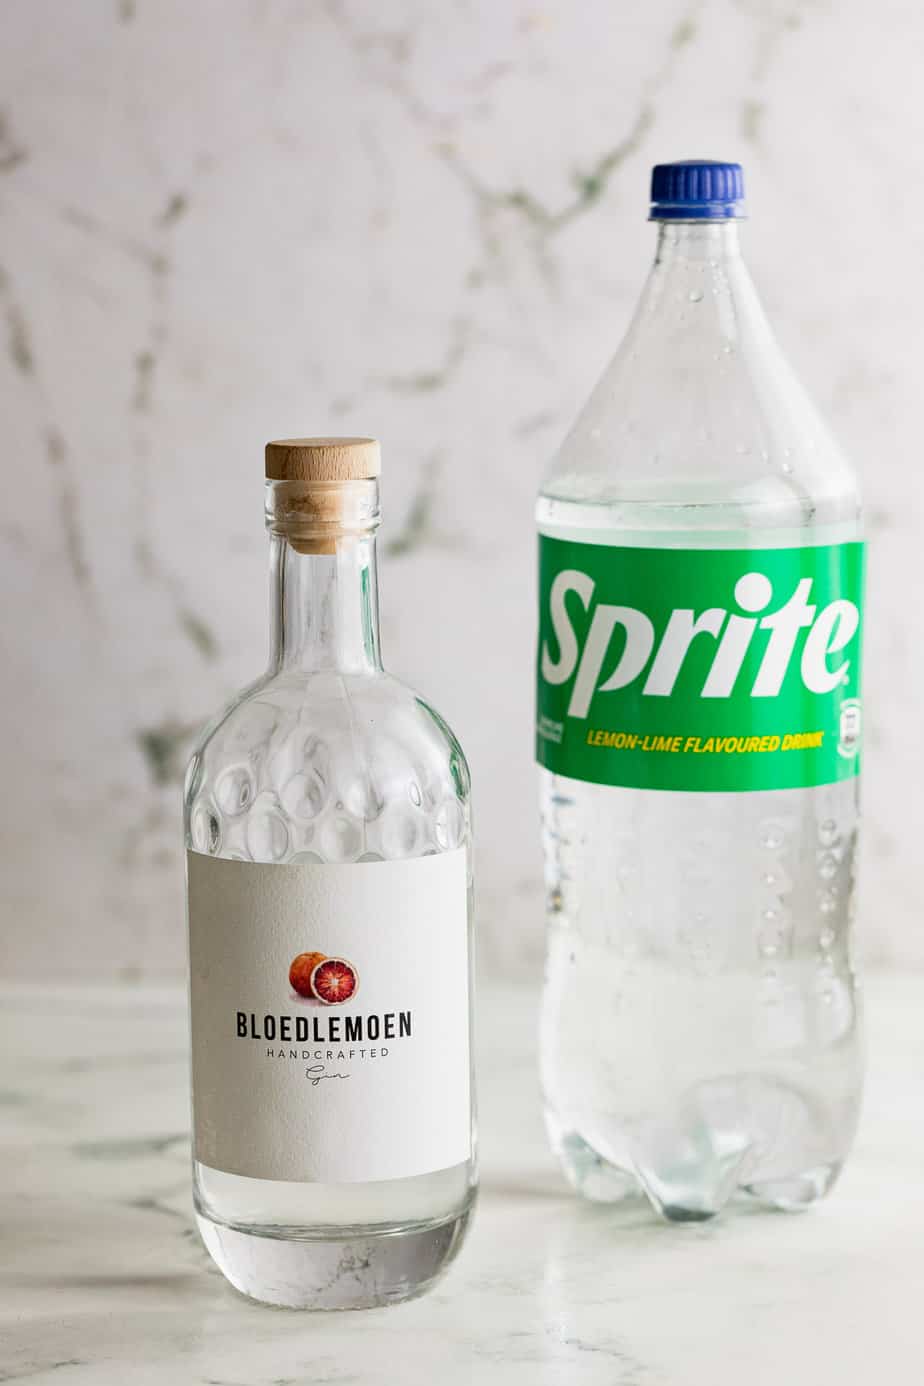 bottle of gin and bottle of sprite on marble